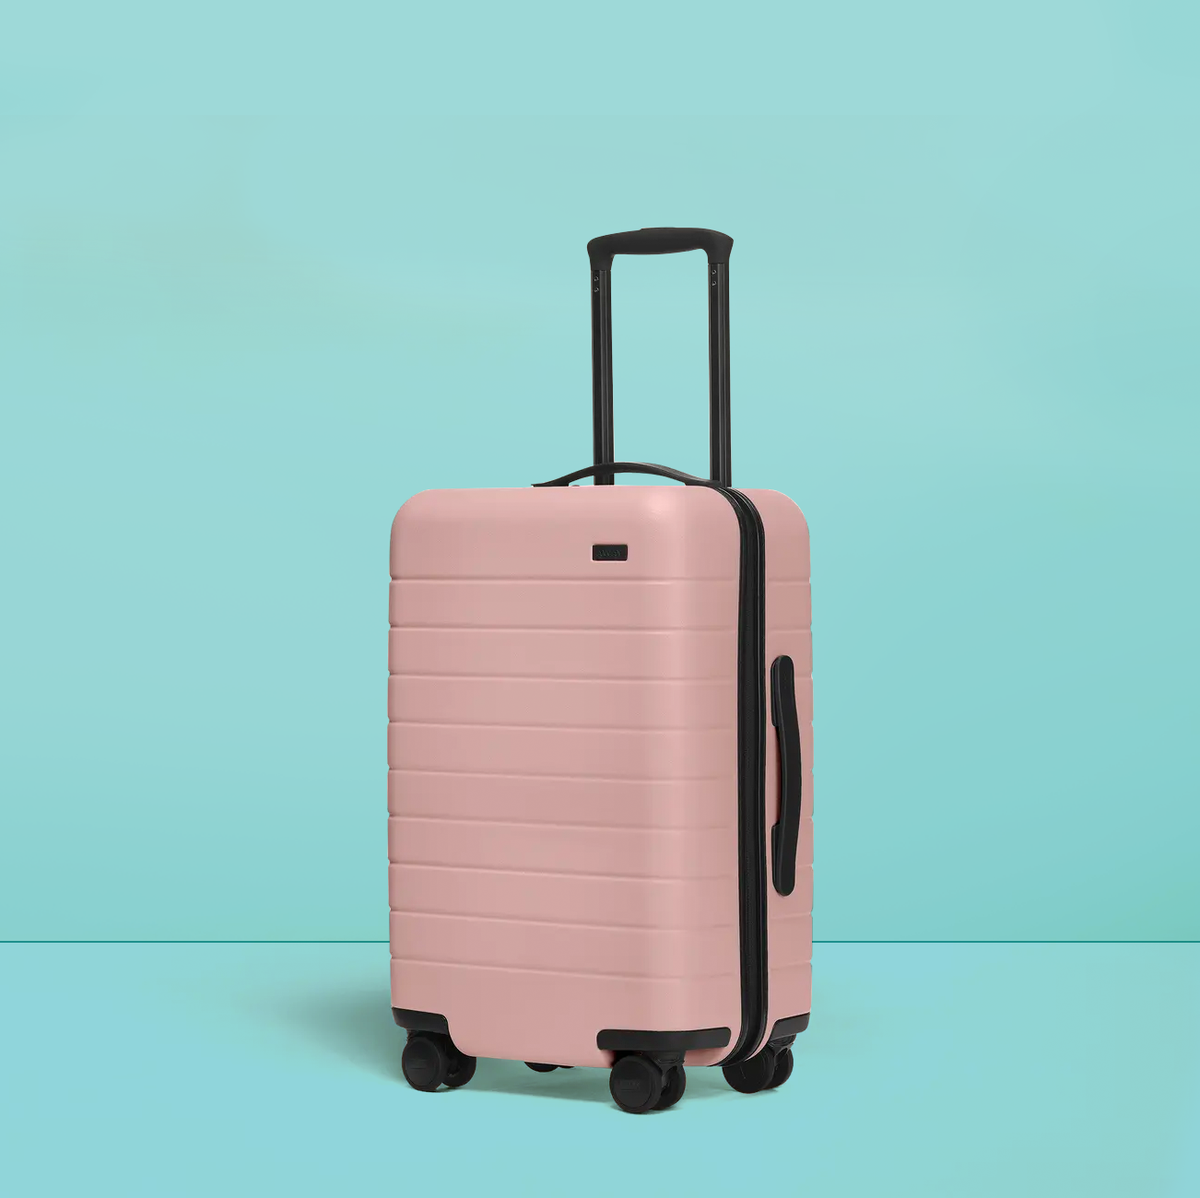 Away Luggage Review 2023: Is the Away Carry-On Worth It?